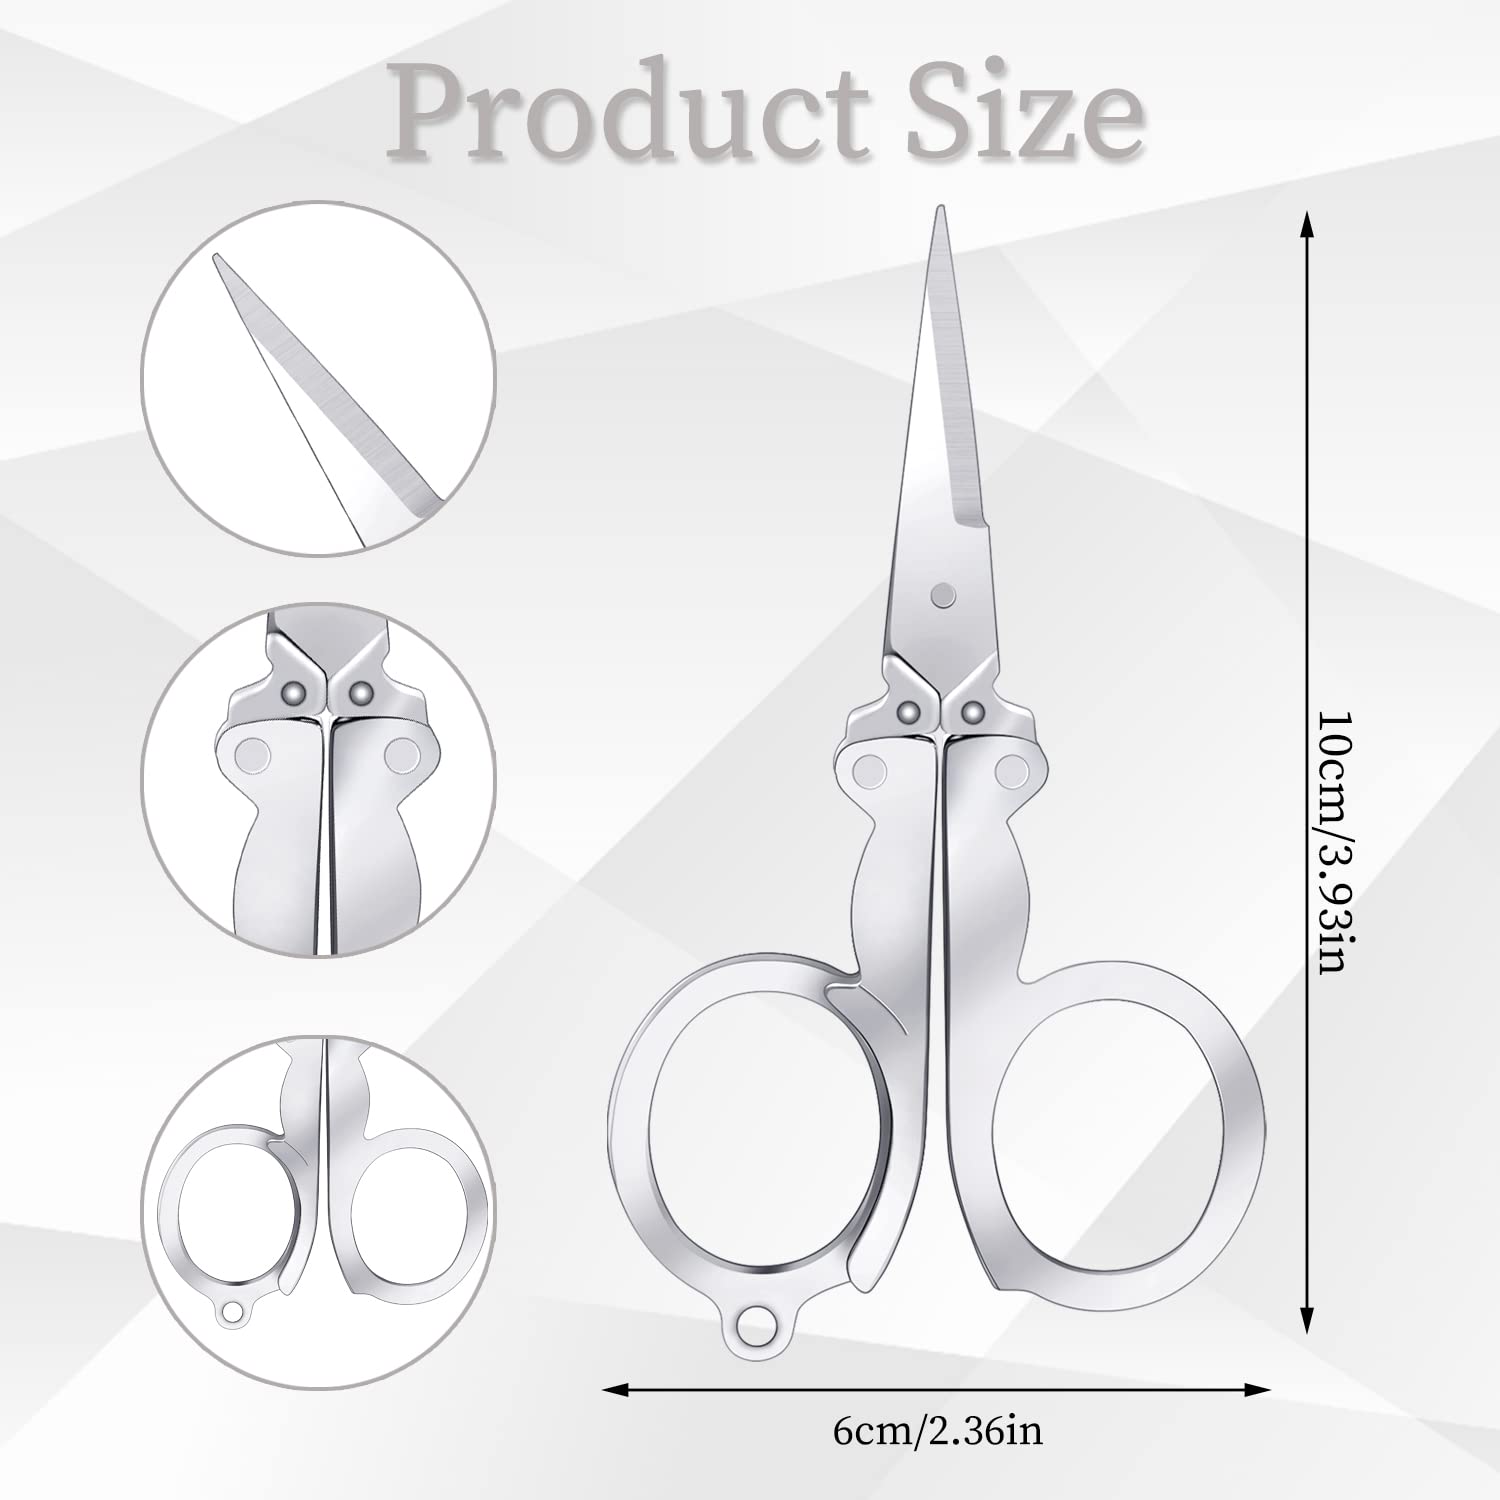 8 Pcs Stainless Steel Small Scissors Folding Scissors, Pocket Portable Foldable Travel Scissors Tiny Mini Craft Cutter for Home Travel, Silver